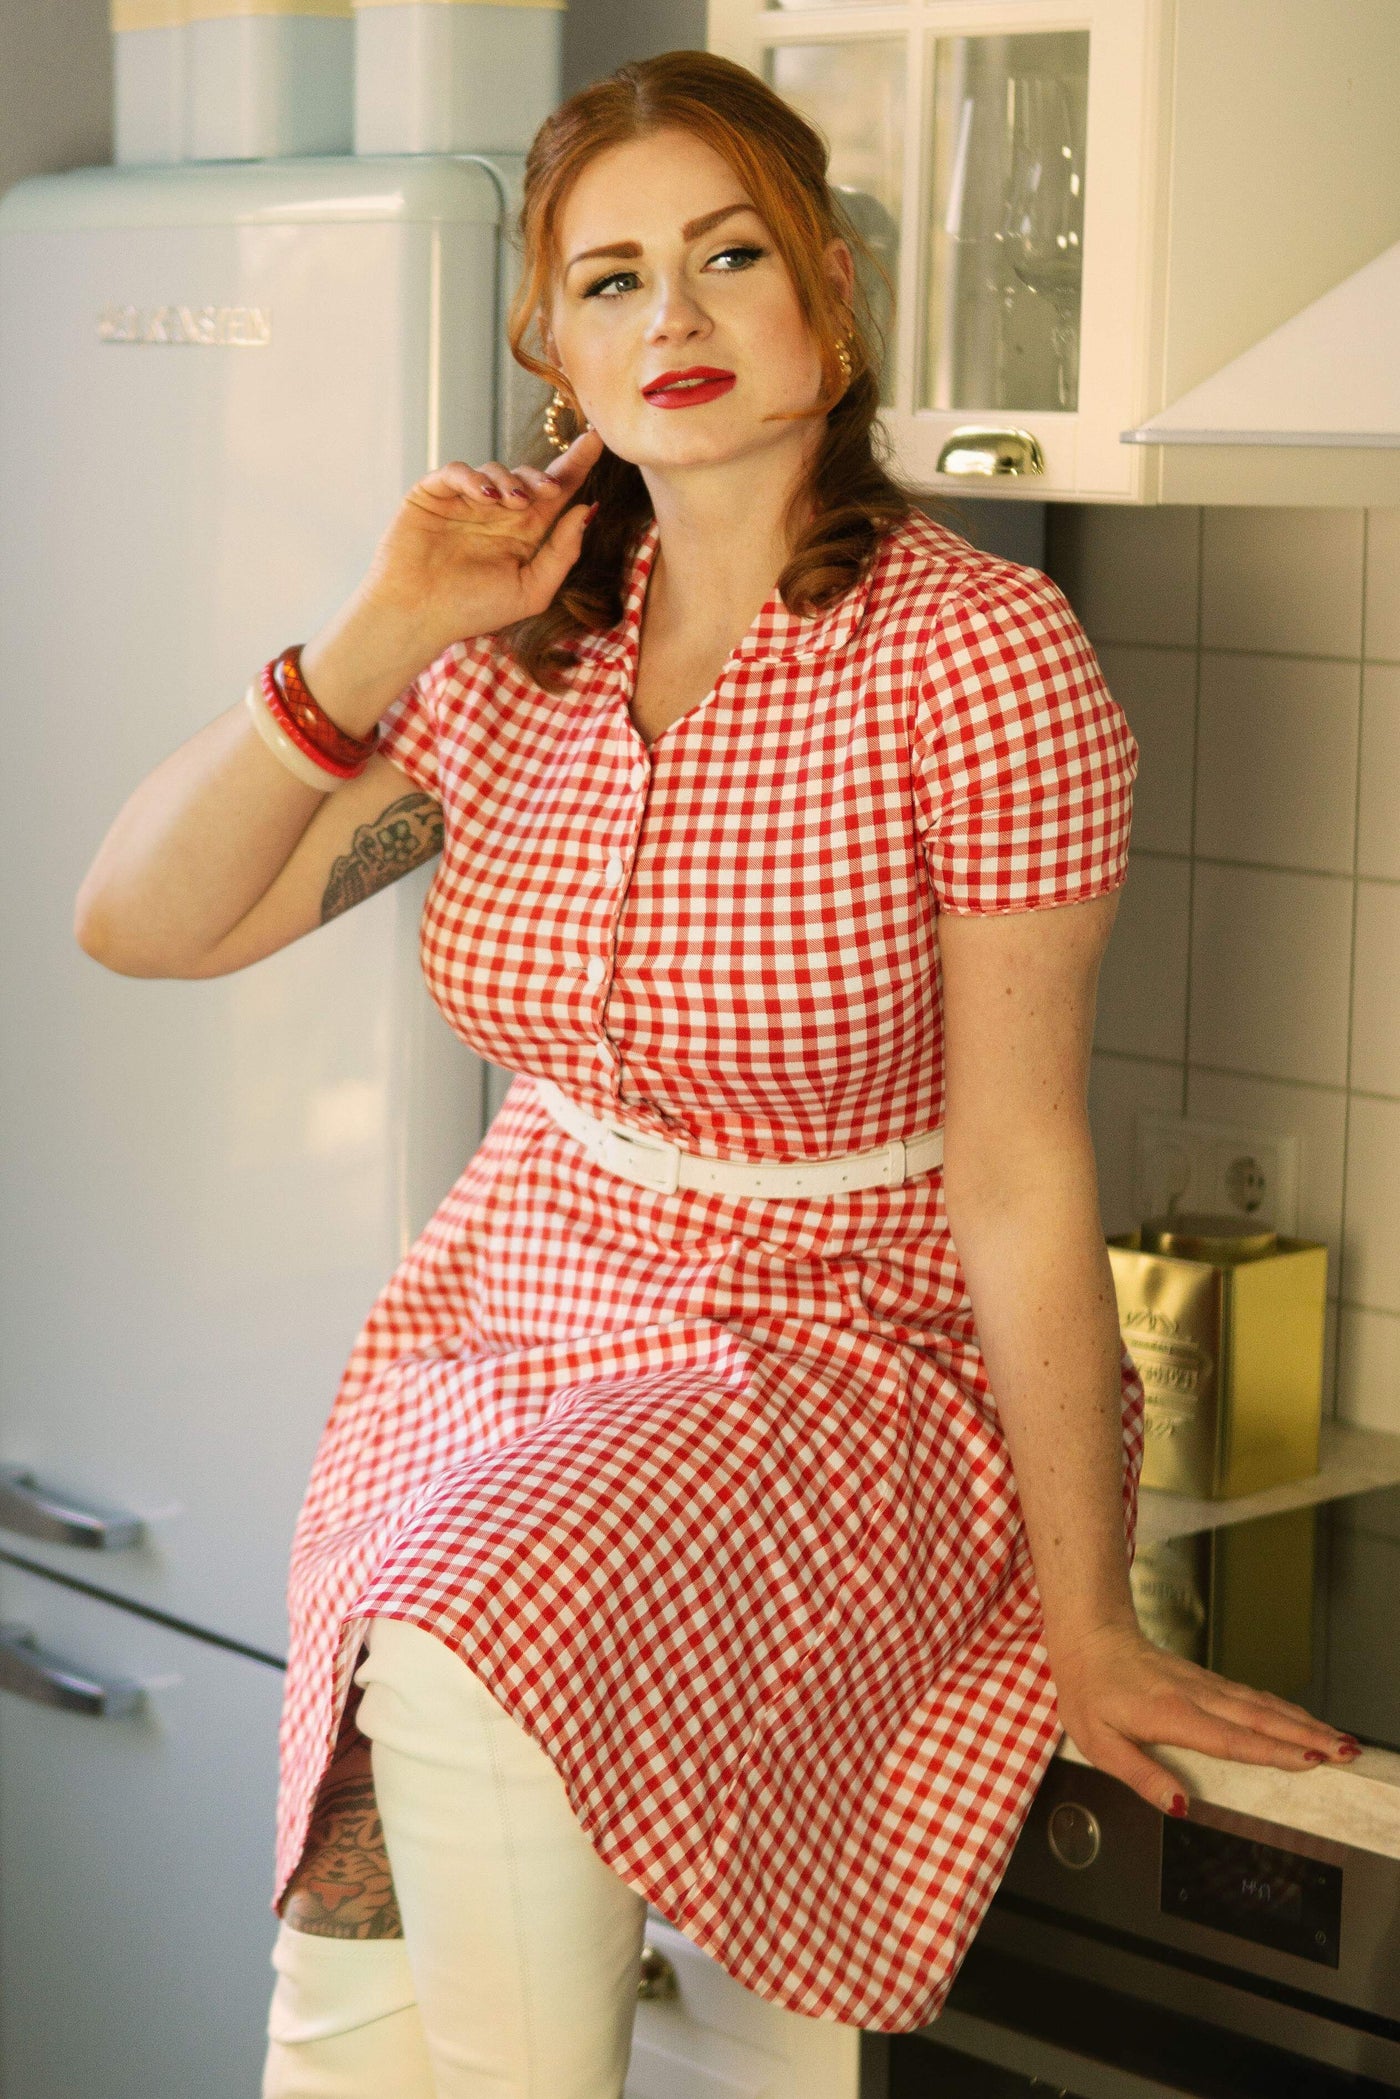 Woman wears our short sleeve Penelope dress, in red and white gingham print, with jeans, in a kitchen